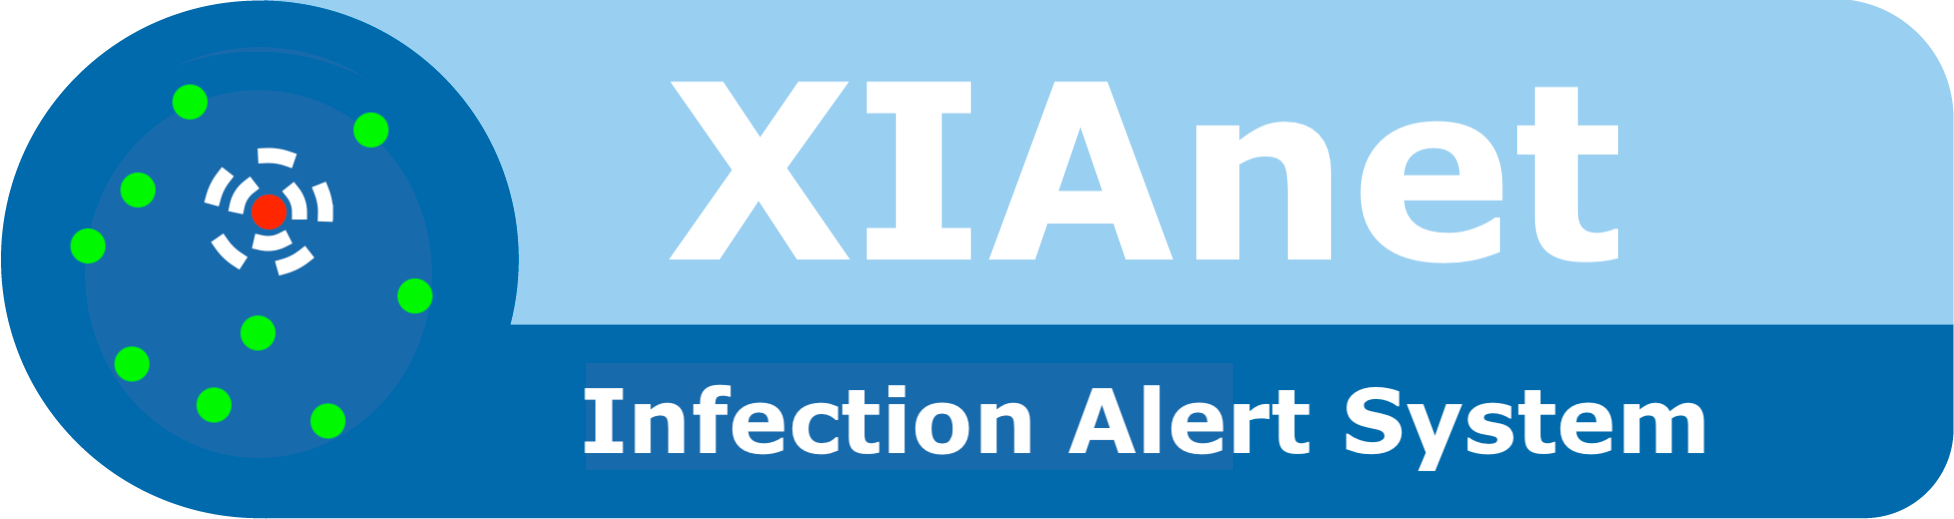 XIAnet Infection Alert System - Covid-19 Tracking App